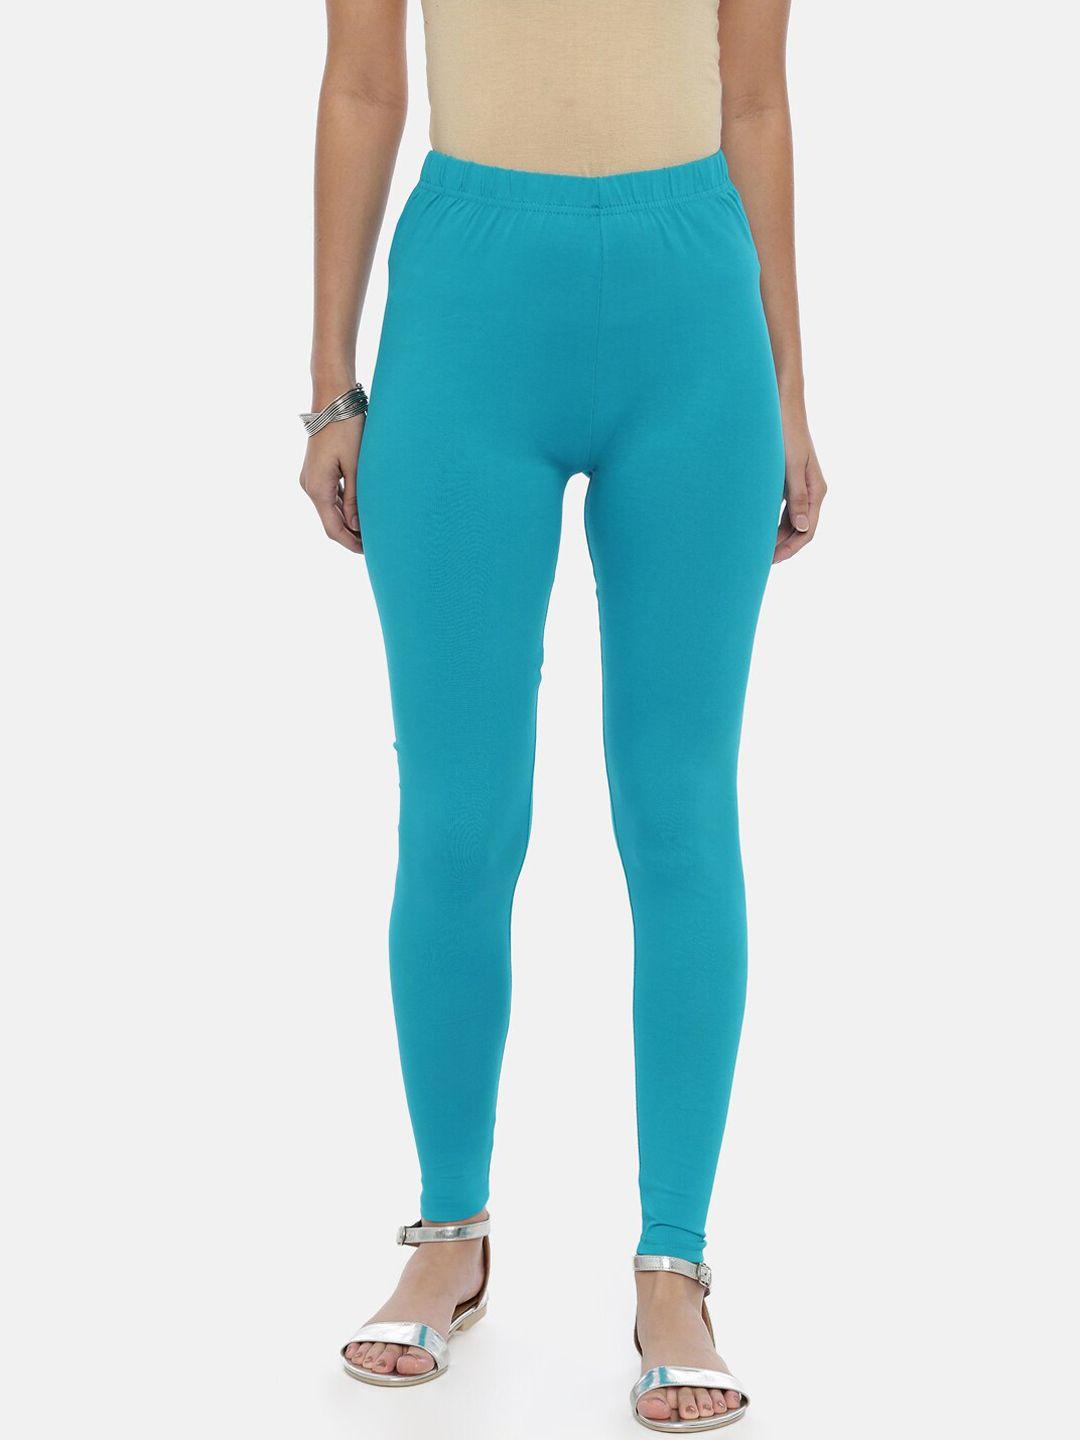 souchii women turquoise blue solid slim-fit ankle-length leggings